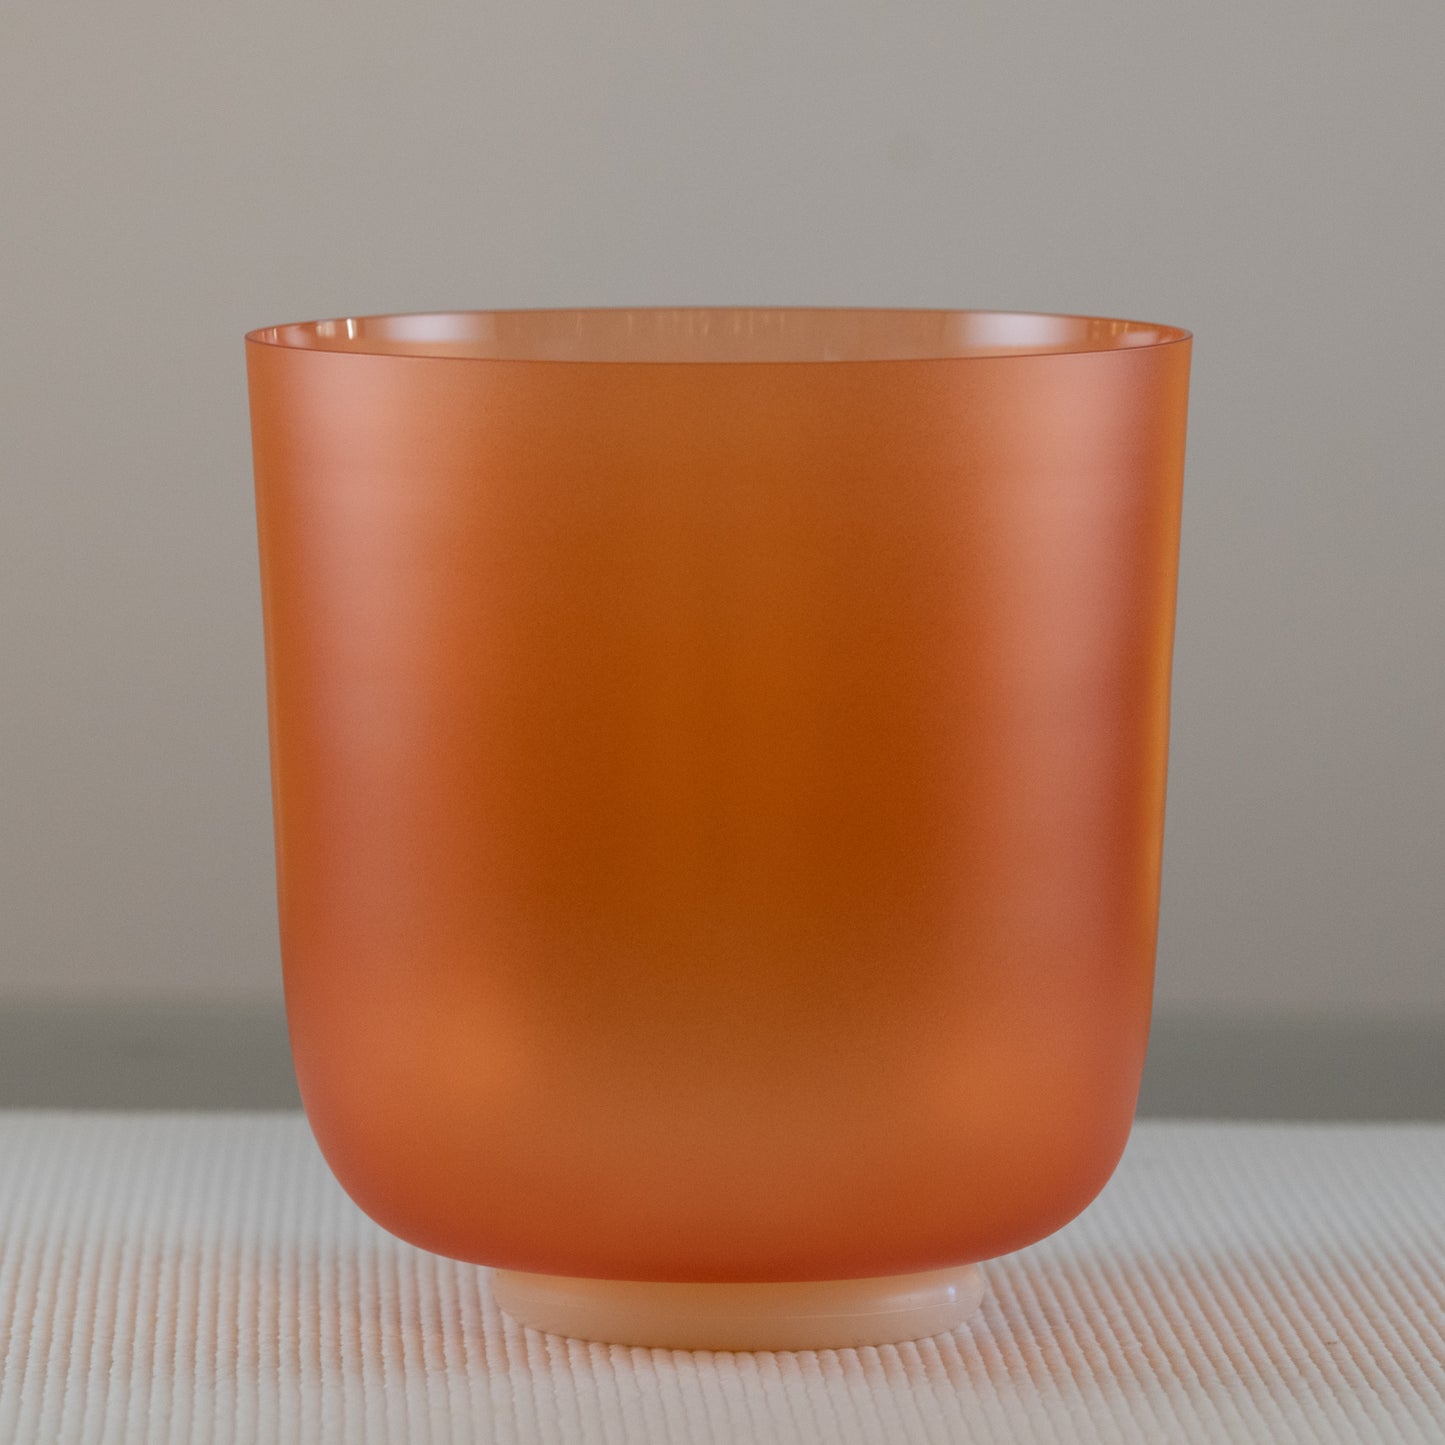 8.25" D+2 Carnelian Color Crystal Singing Bowl, Lightly Frosted Outside, Perfect Pitch, Sacred Singing Bowls